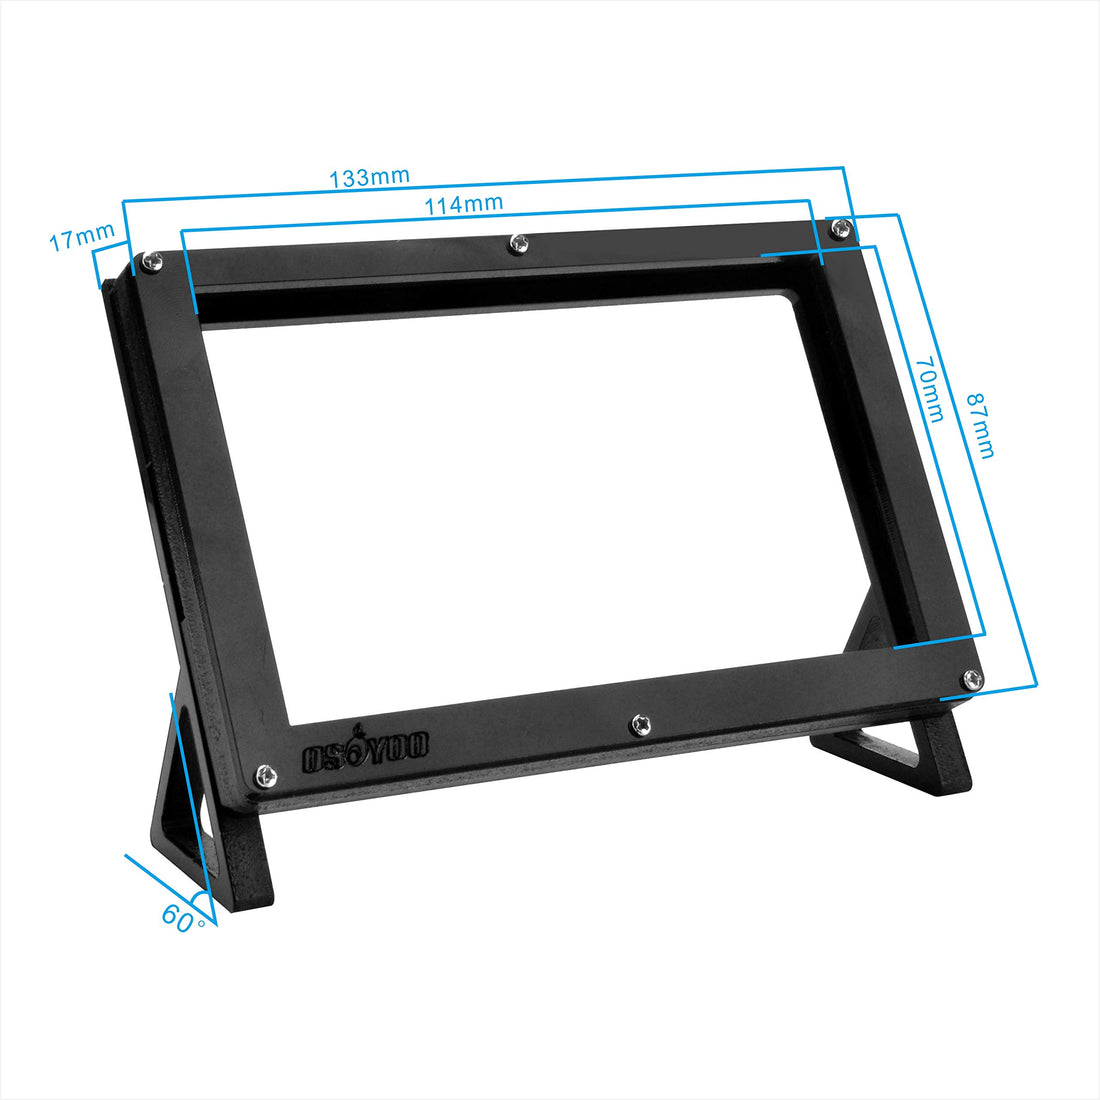 OSOYOO Protective Case Stand Holder for Raspberry Pi 4 3 3B+ 2 5 Inch DSI Touch Screen LCD Display